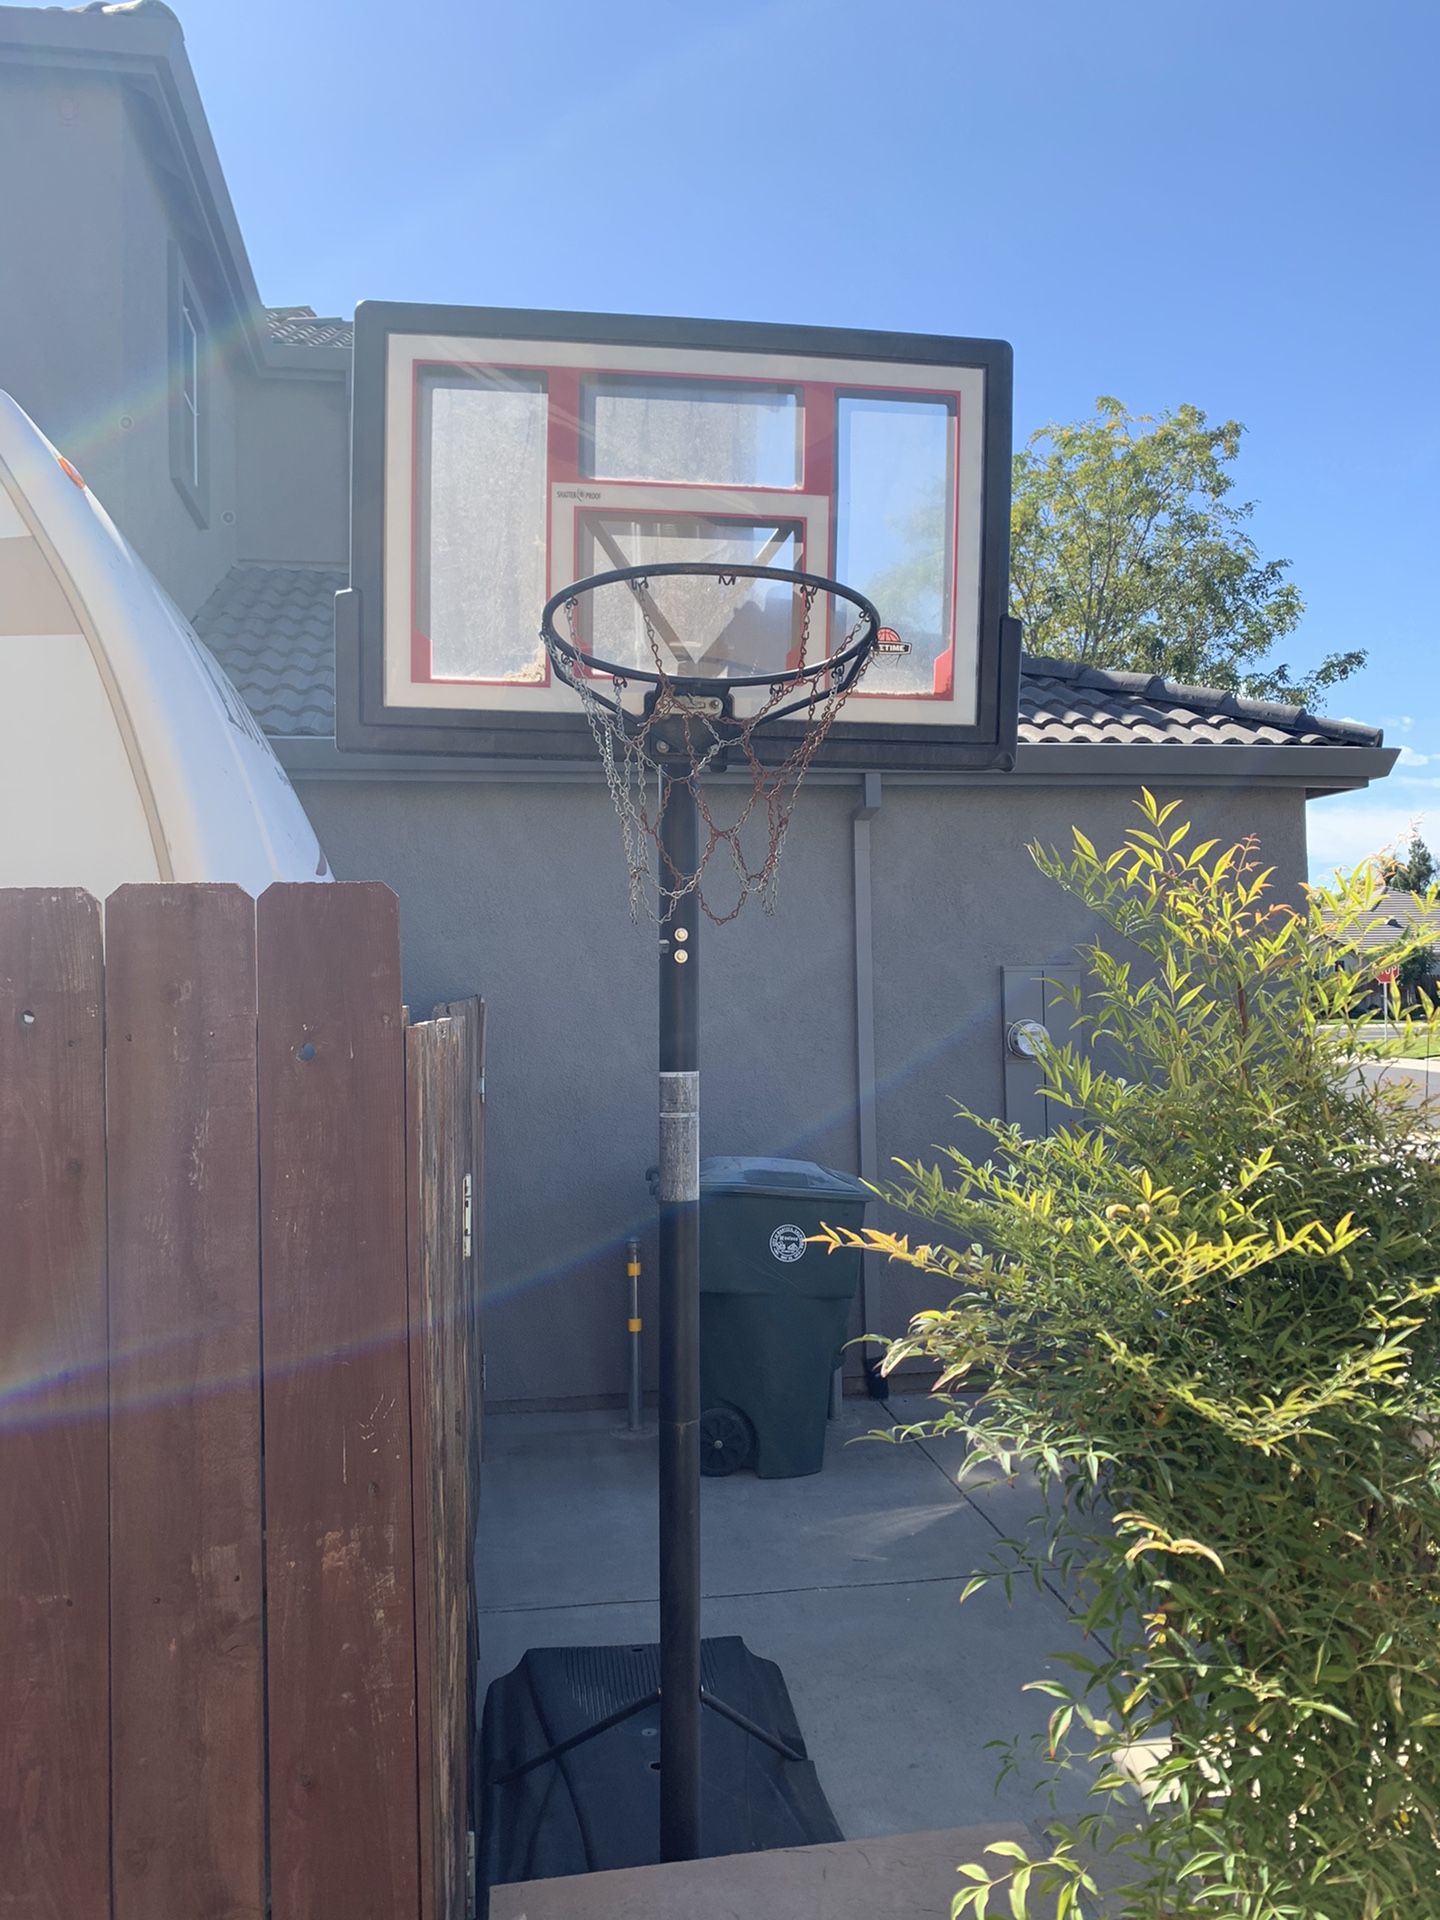 48in Lifetime Shatterproof Basketball Hoop. Brand new adjustable lever- works great. Also comes with additional net.